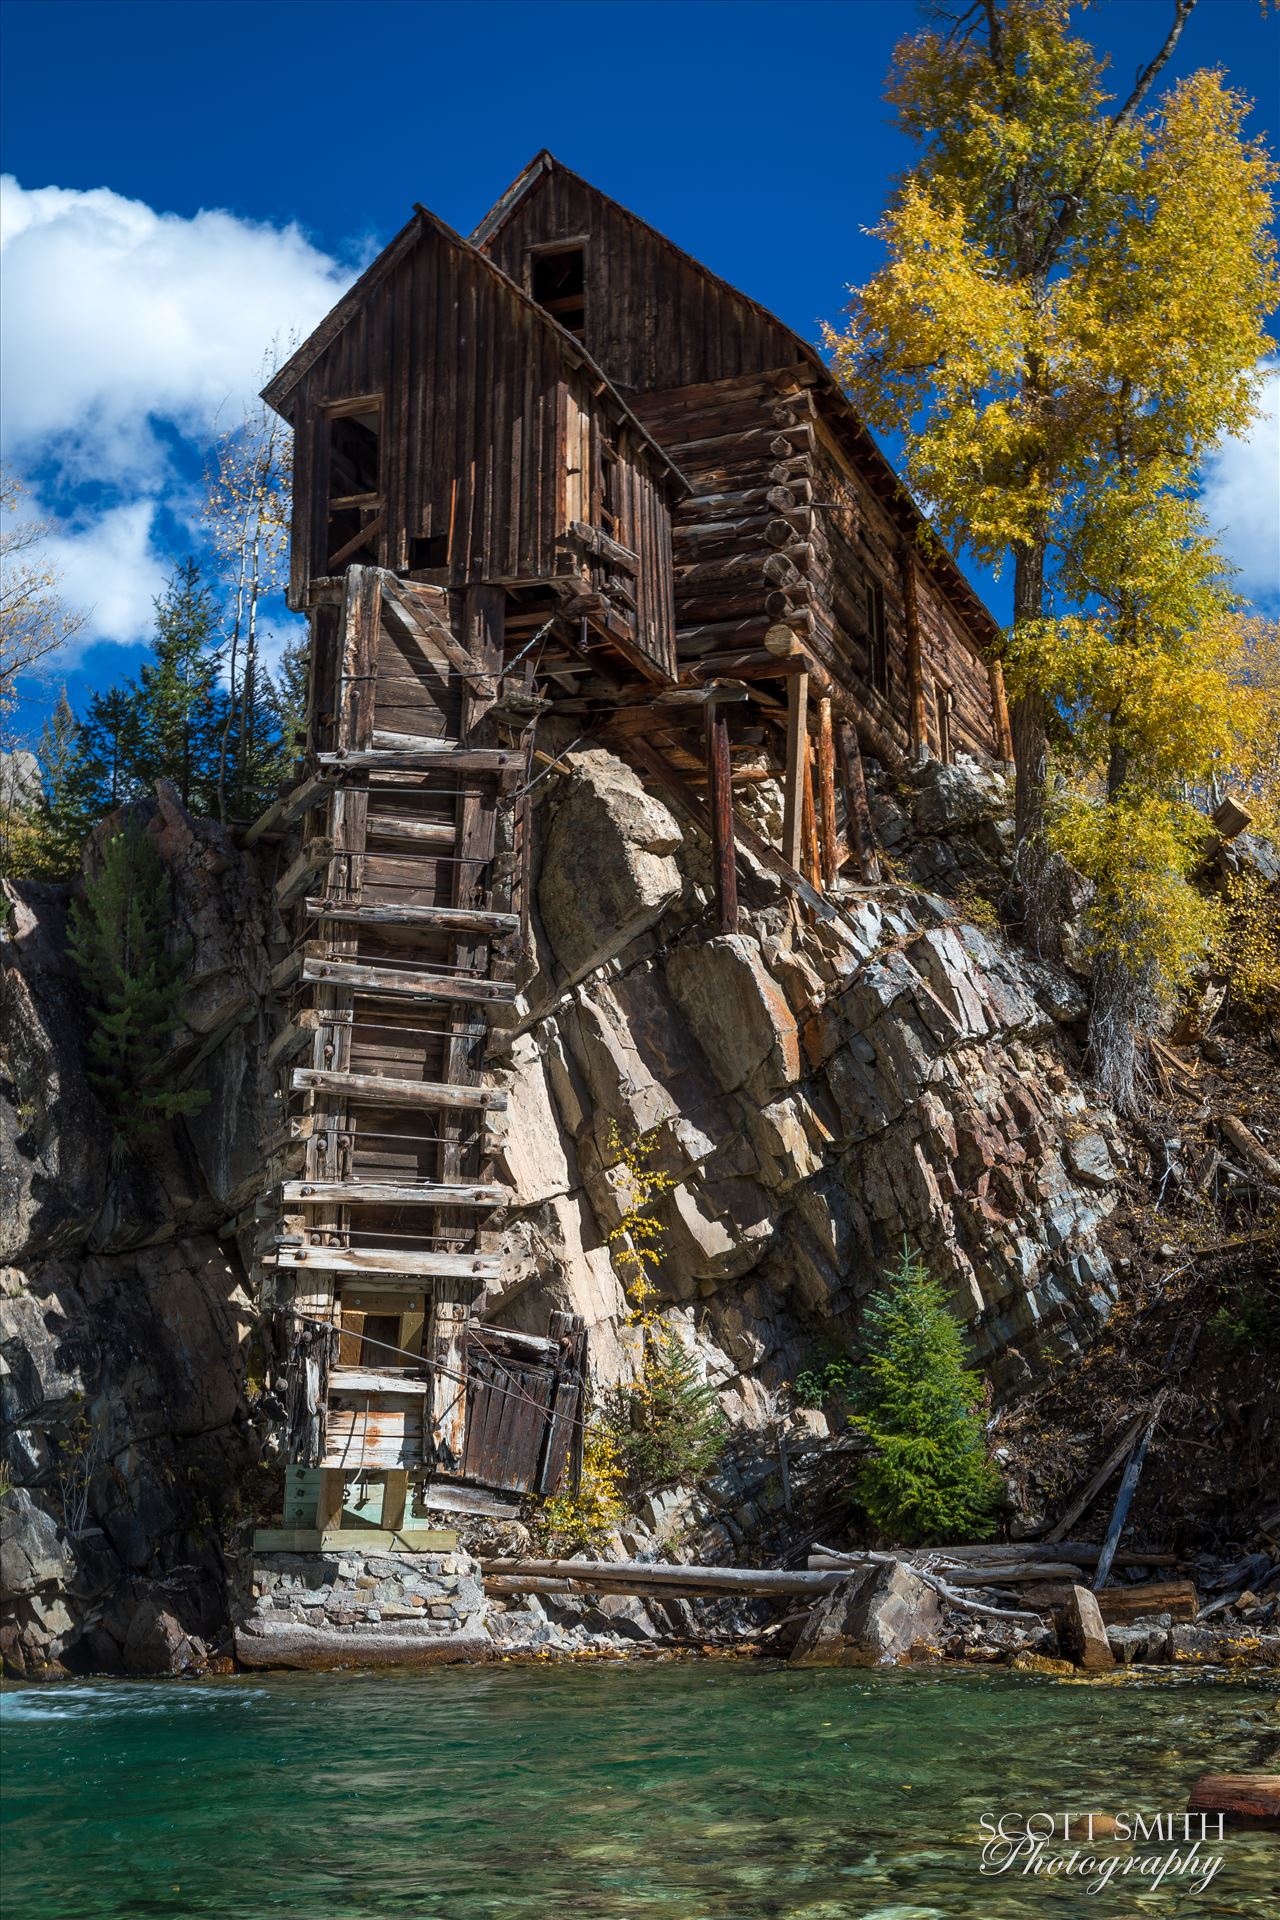 Crystal Mill, Colorado 05 - The Crystal Mill, or the Old Mill is an 1892 wooden powerhouse located on an outcrop above the Crystal River in Crystal, Colorado by Scott Smith Photos